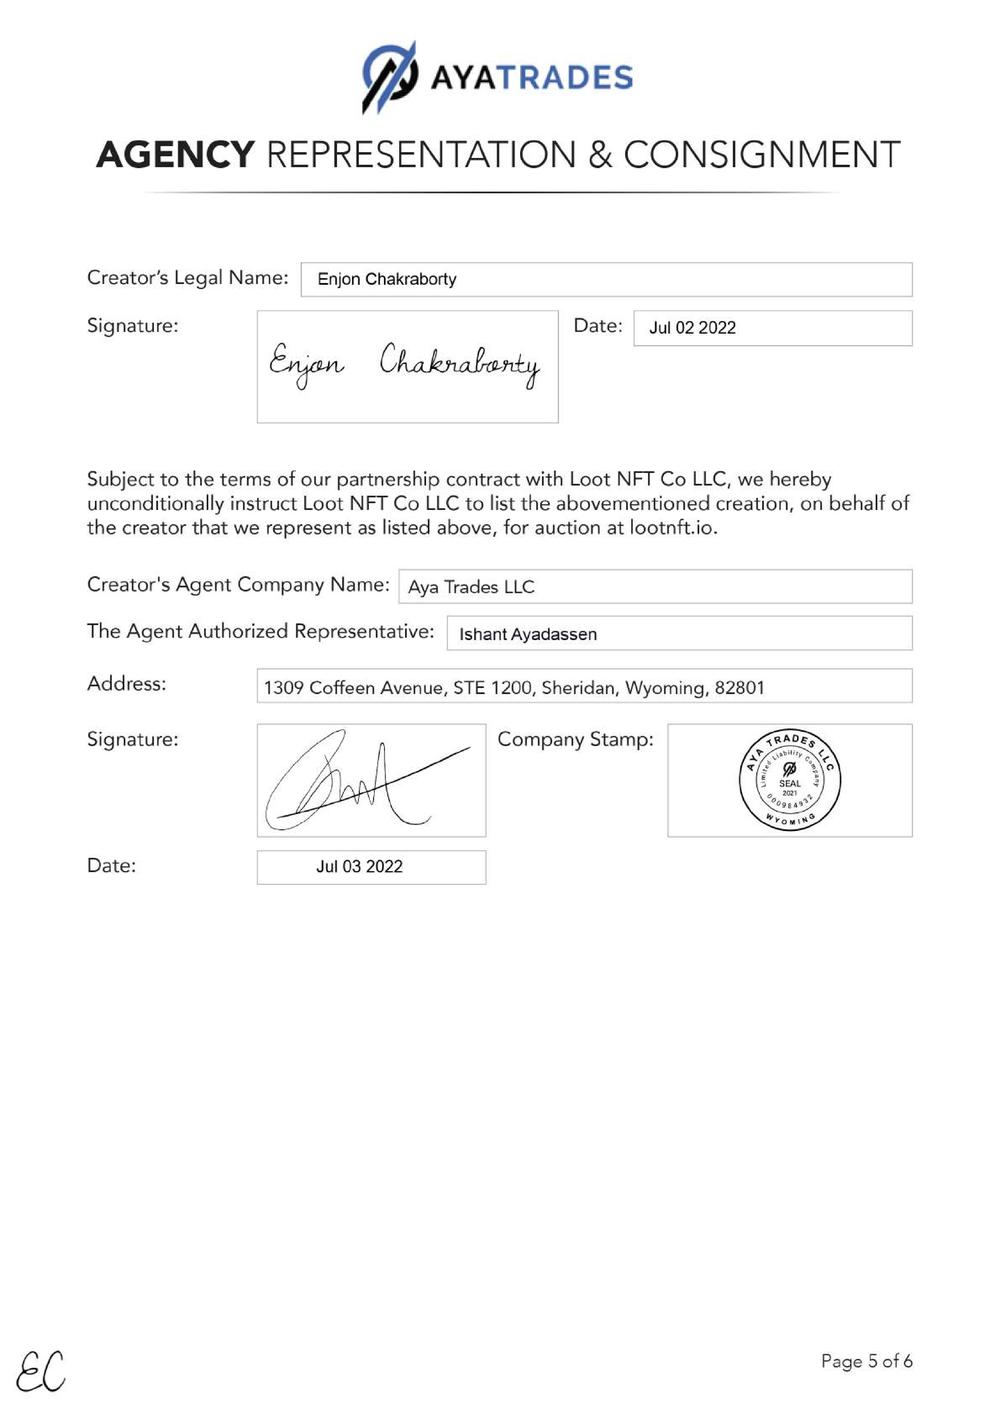 Certificate of Authenticity and Consignment - The Research Facility